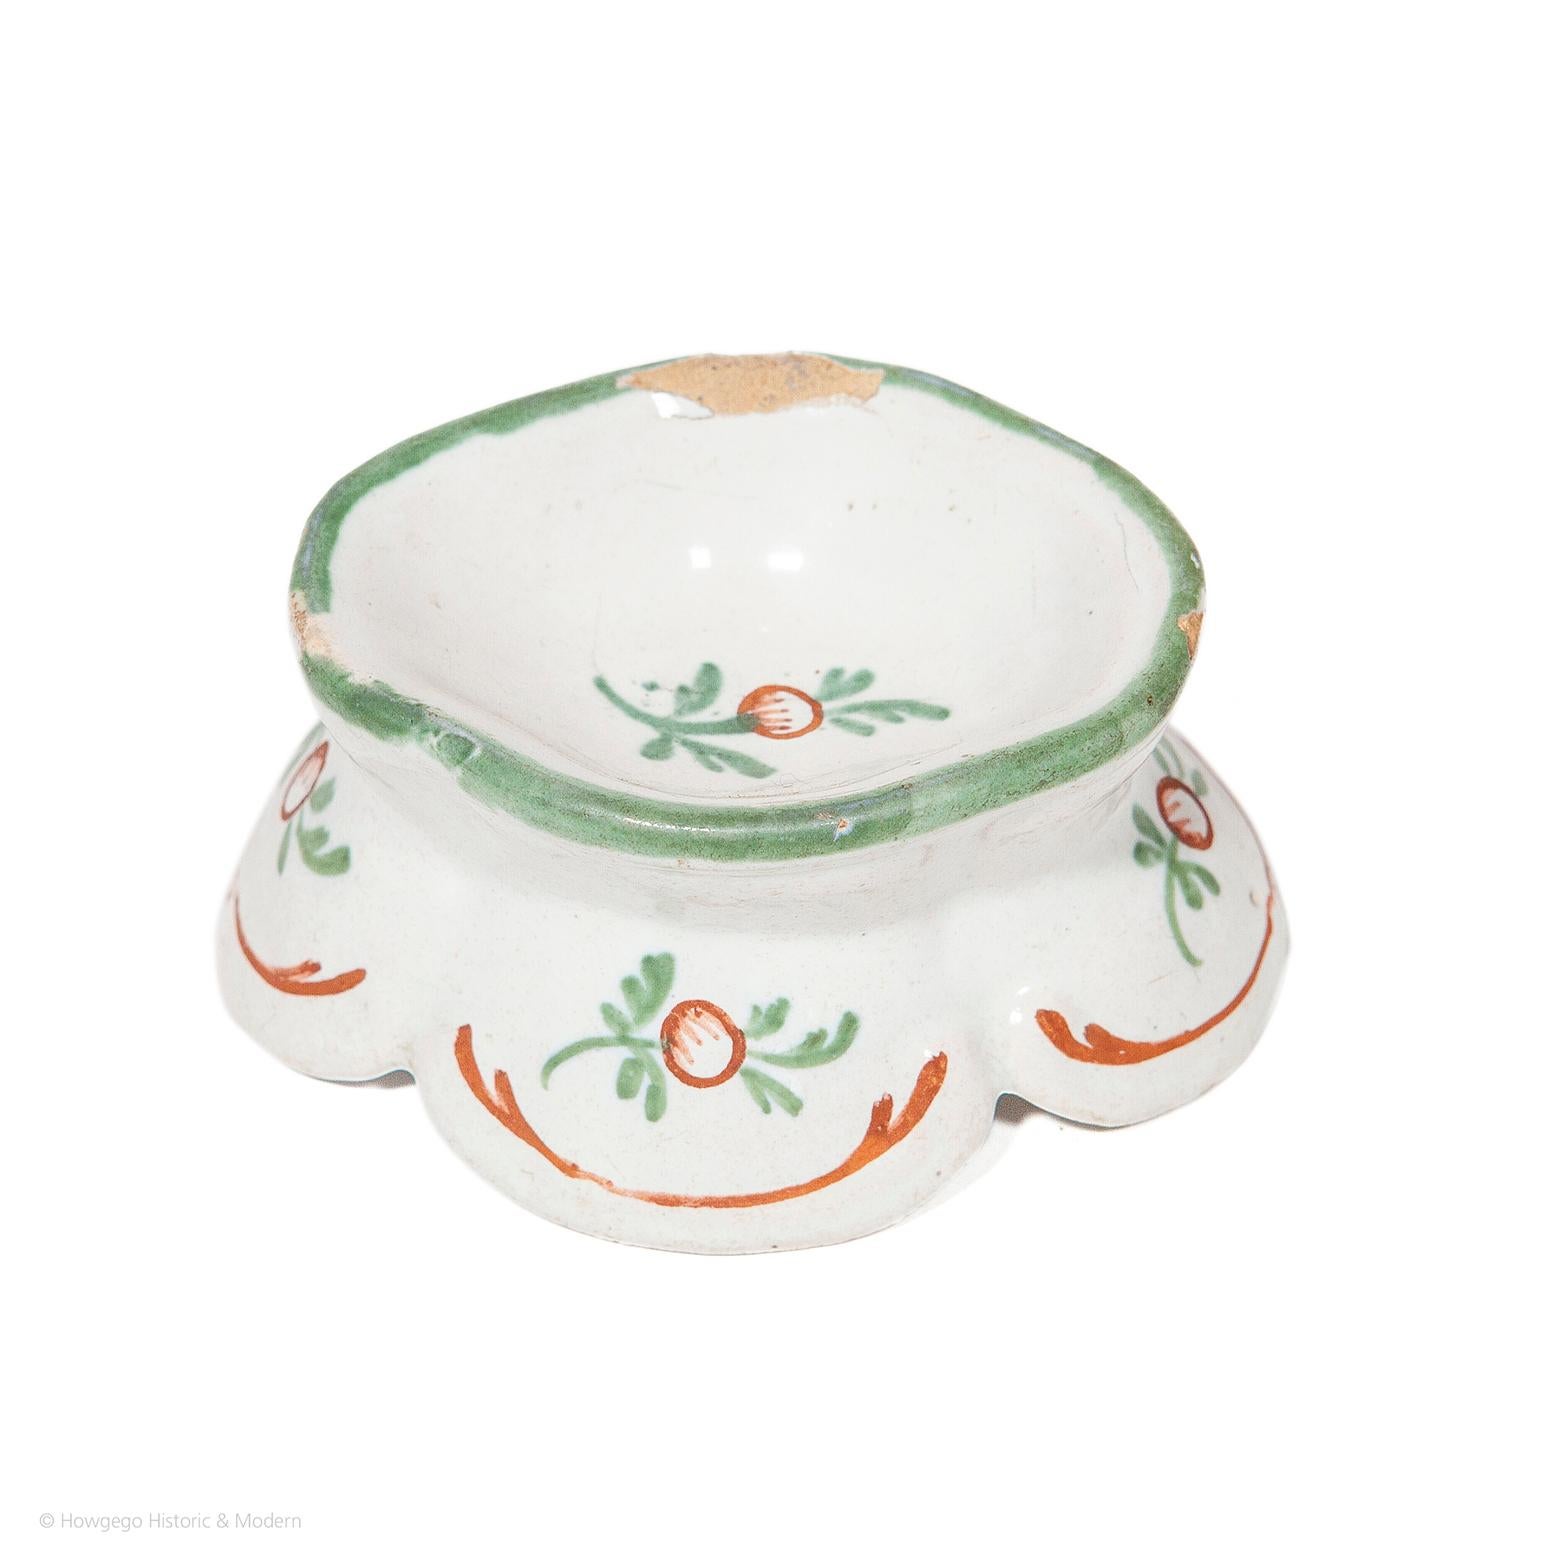 Hand-Painted Salt Cellar Dish Faience French Oval Shaped Skirt Green Brown White For Sale